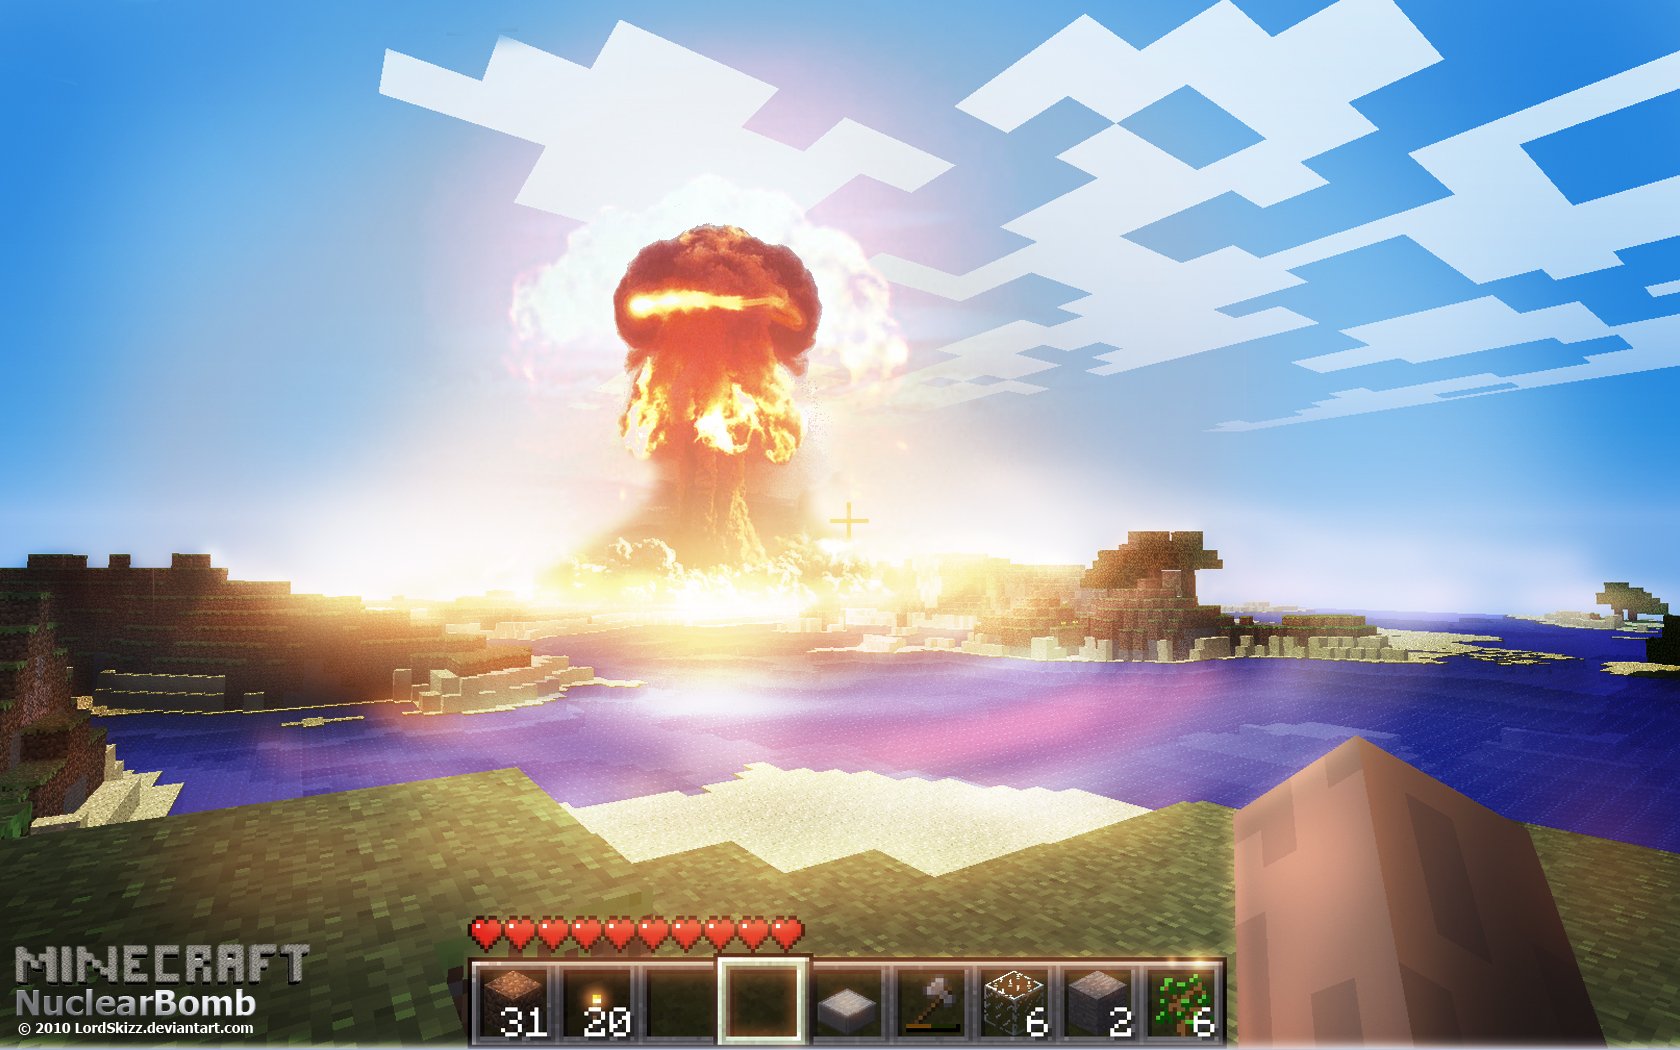 Minecraft Nuclear Bomb Wallpaper LOLd Wallpaper Funny Pictures